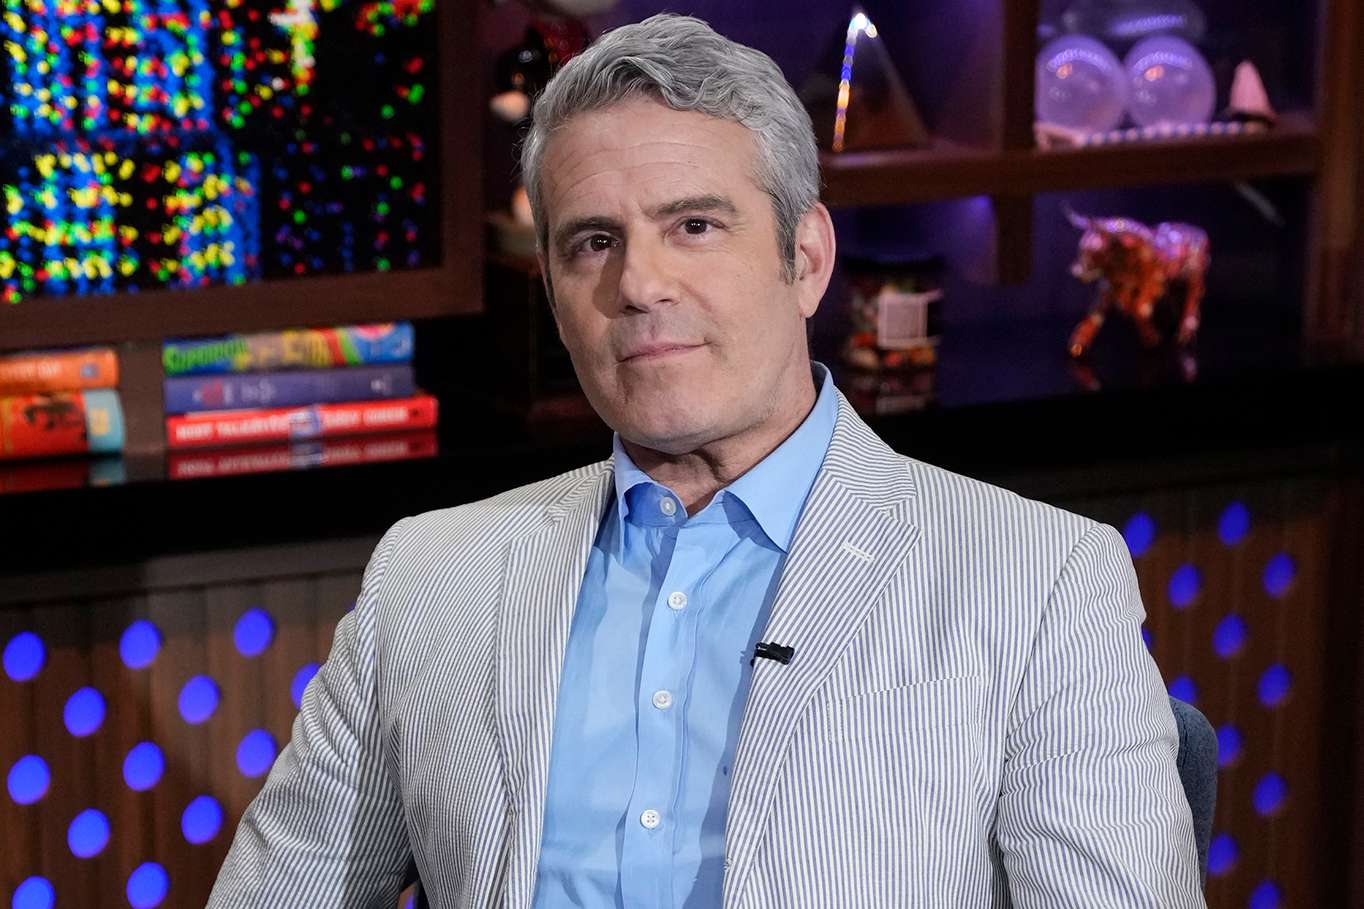 Why Andy Cohen Felt 'Salty' About “WWHL” Being Left Out of the 'Late-Night Conversation': 'This Kind of Sucks'